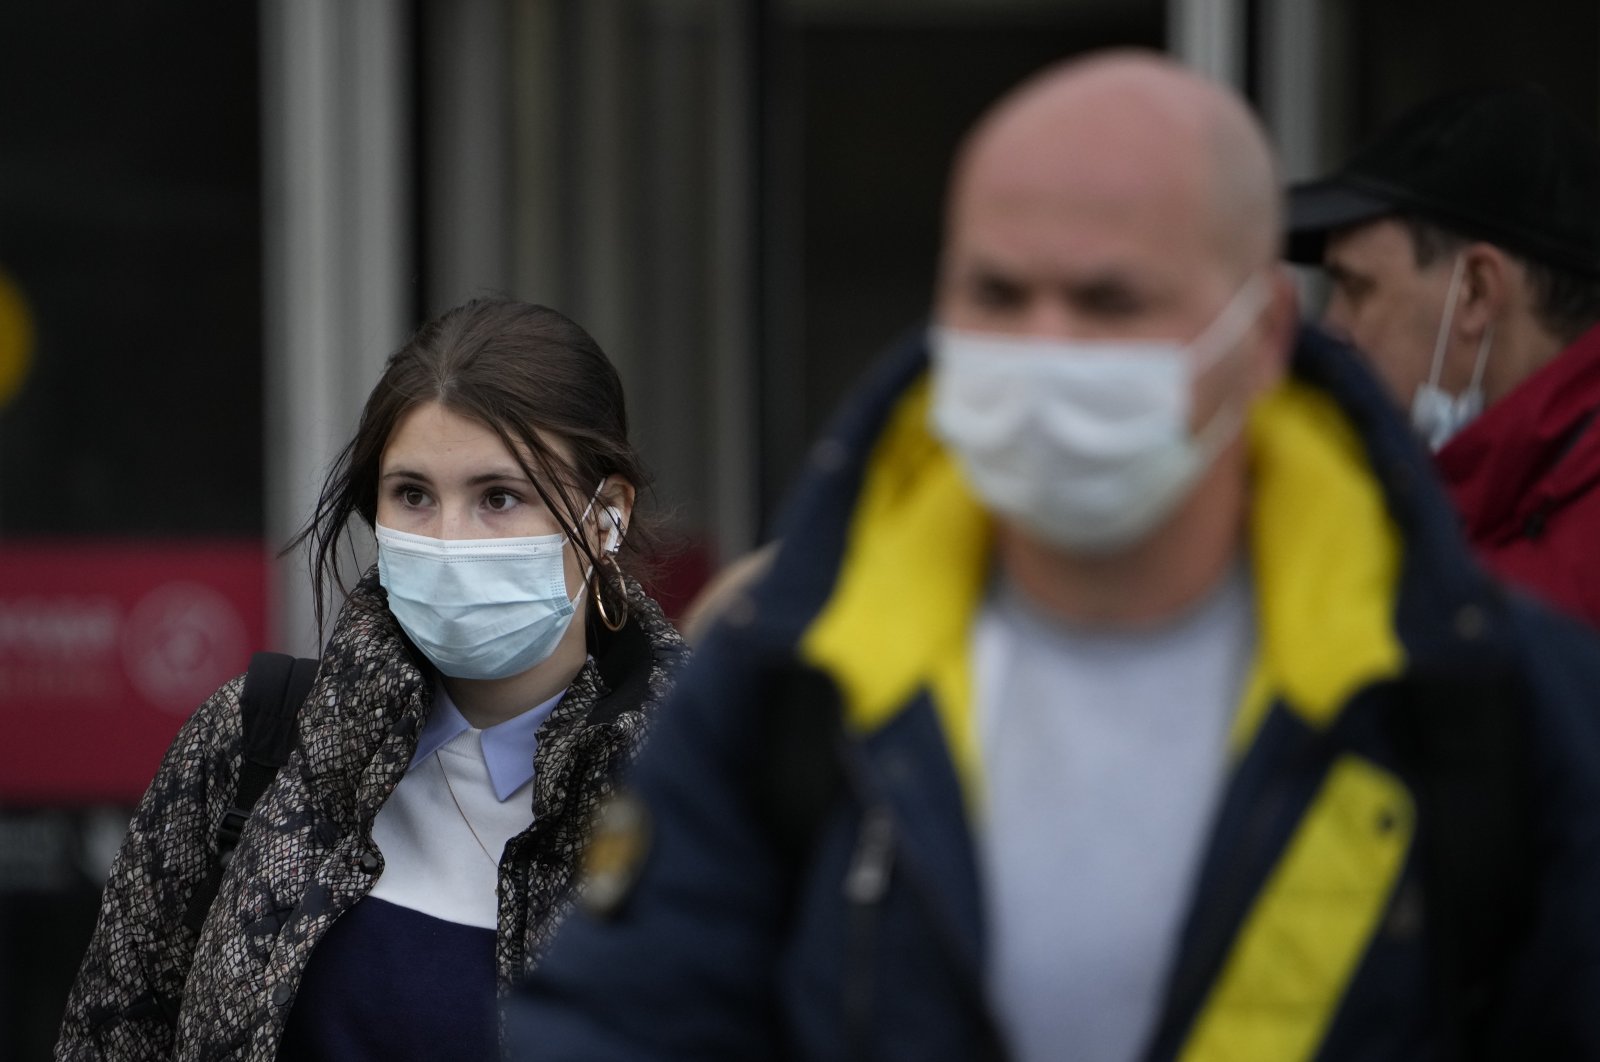 People wearing face masks to help curb the spread of the coronavirus leave a subway in Moscow, Russia, Oct. 15, 2021. (AP Photo)